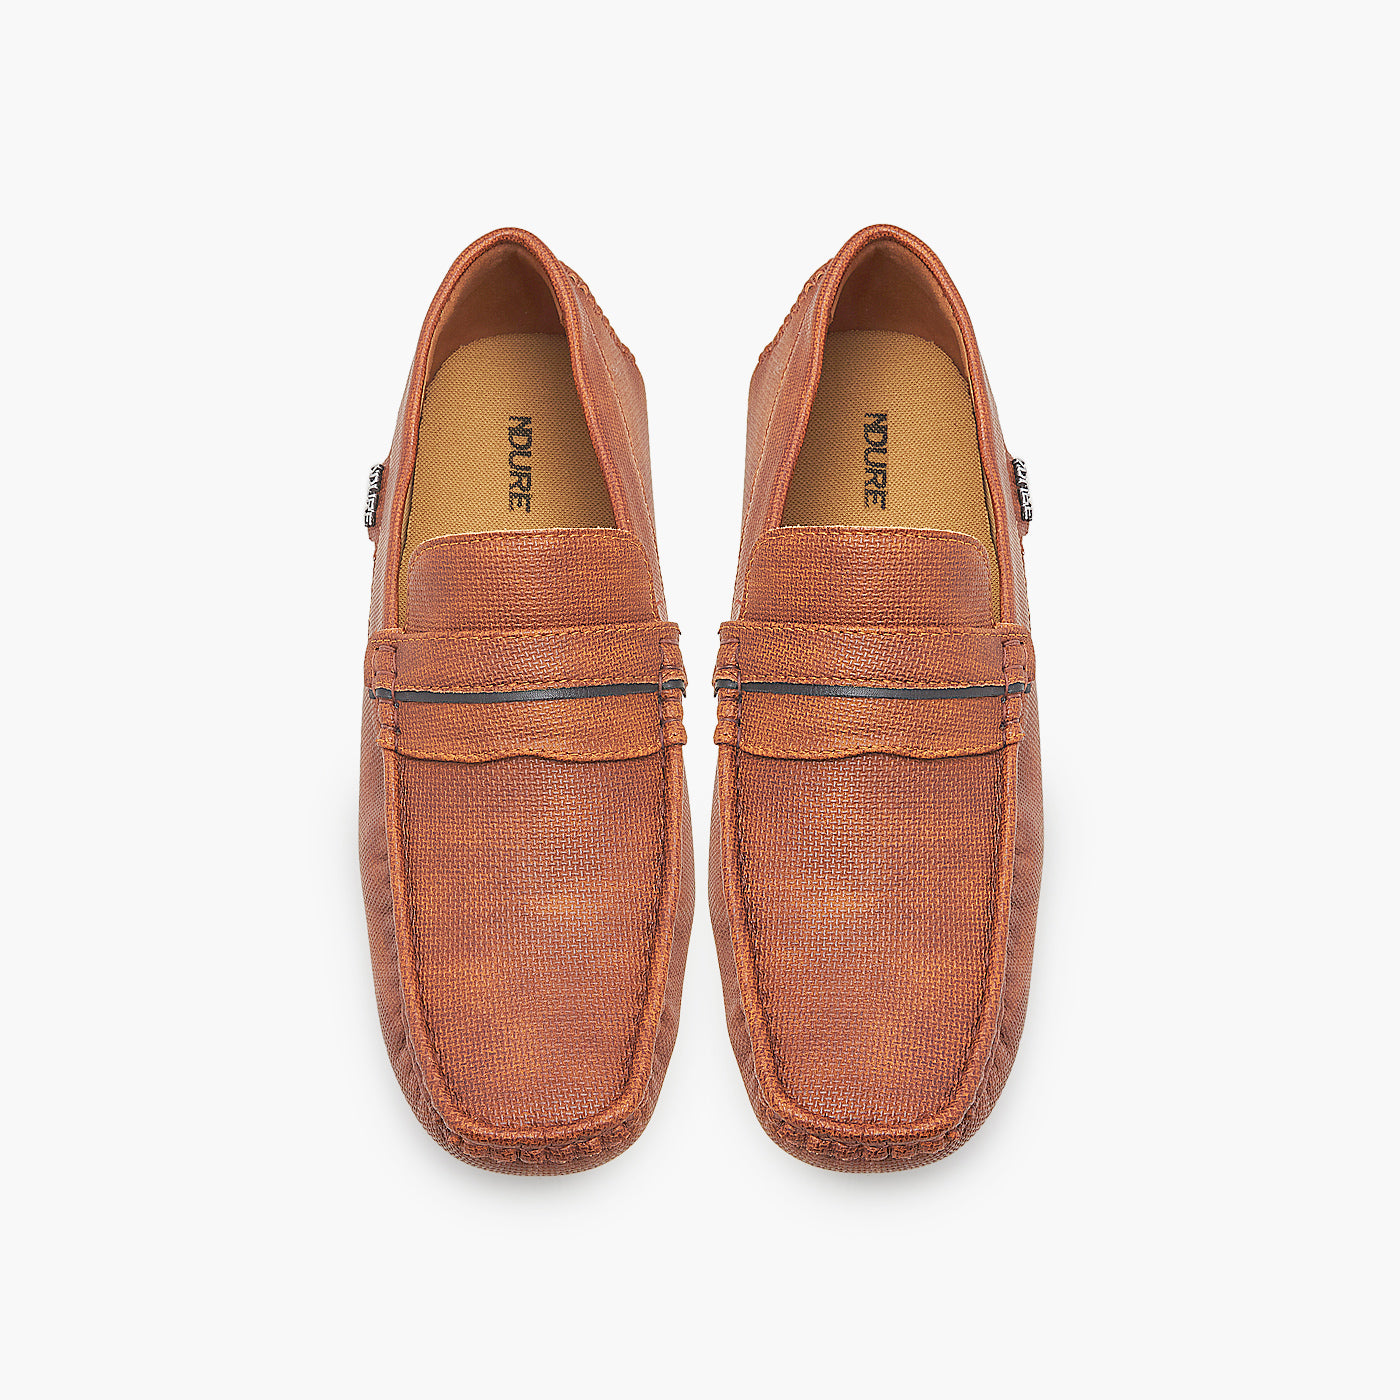 Men's Comfortable Loafers